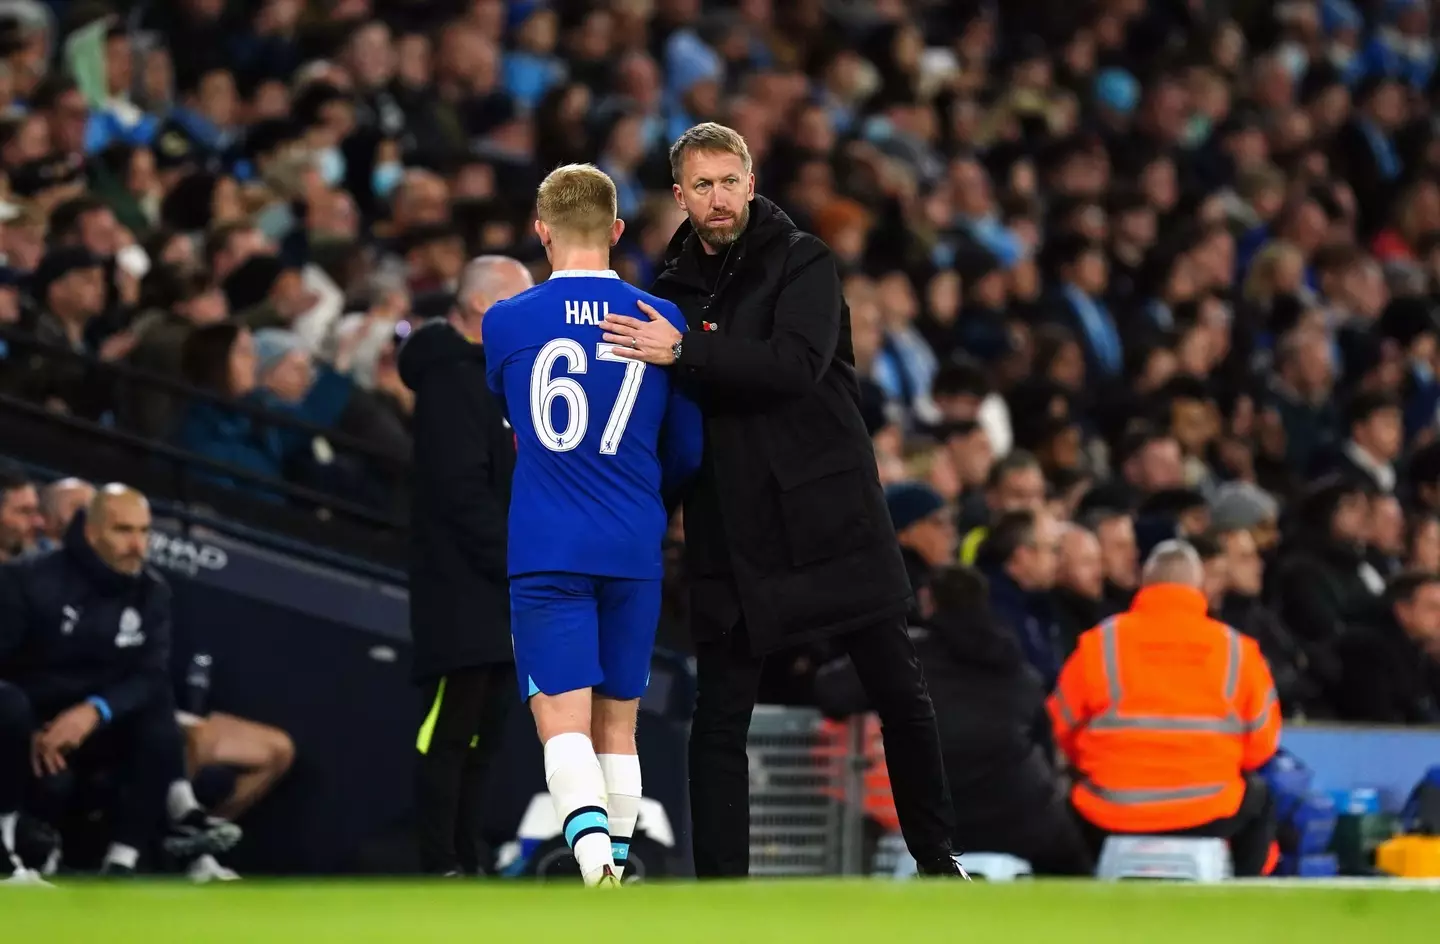 Chelsea's Lewis Hall greets manager Graham Potter after being substituted off during the Carabao Cup third round match at the Etihad Stadium. (Alamy)